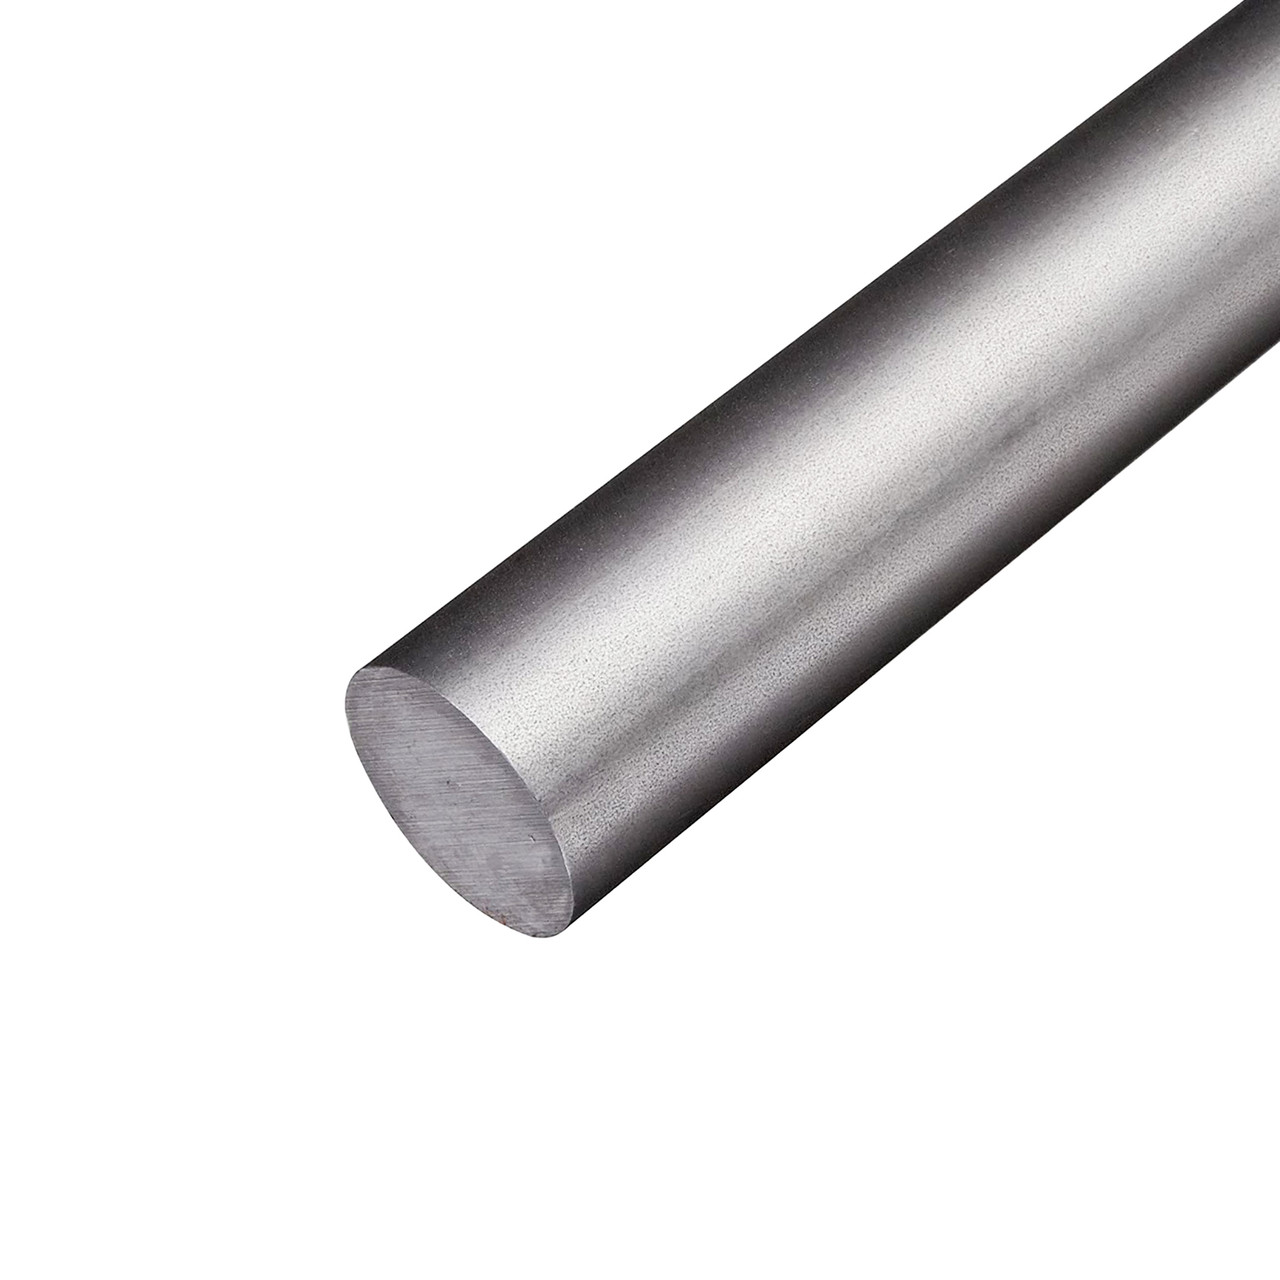 1.375 (1-3/8 inch) x 18 inches, 8620 Alloy Steel Round Rod, Cold Finished